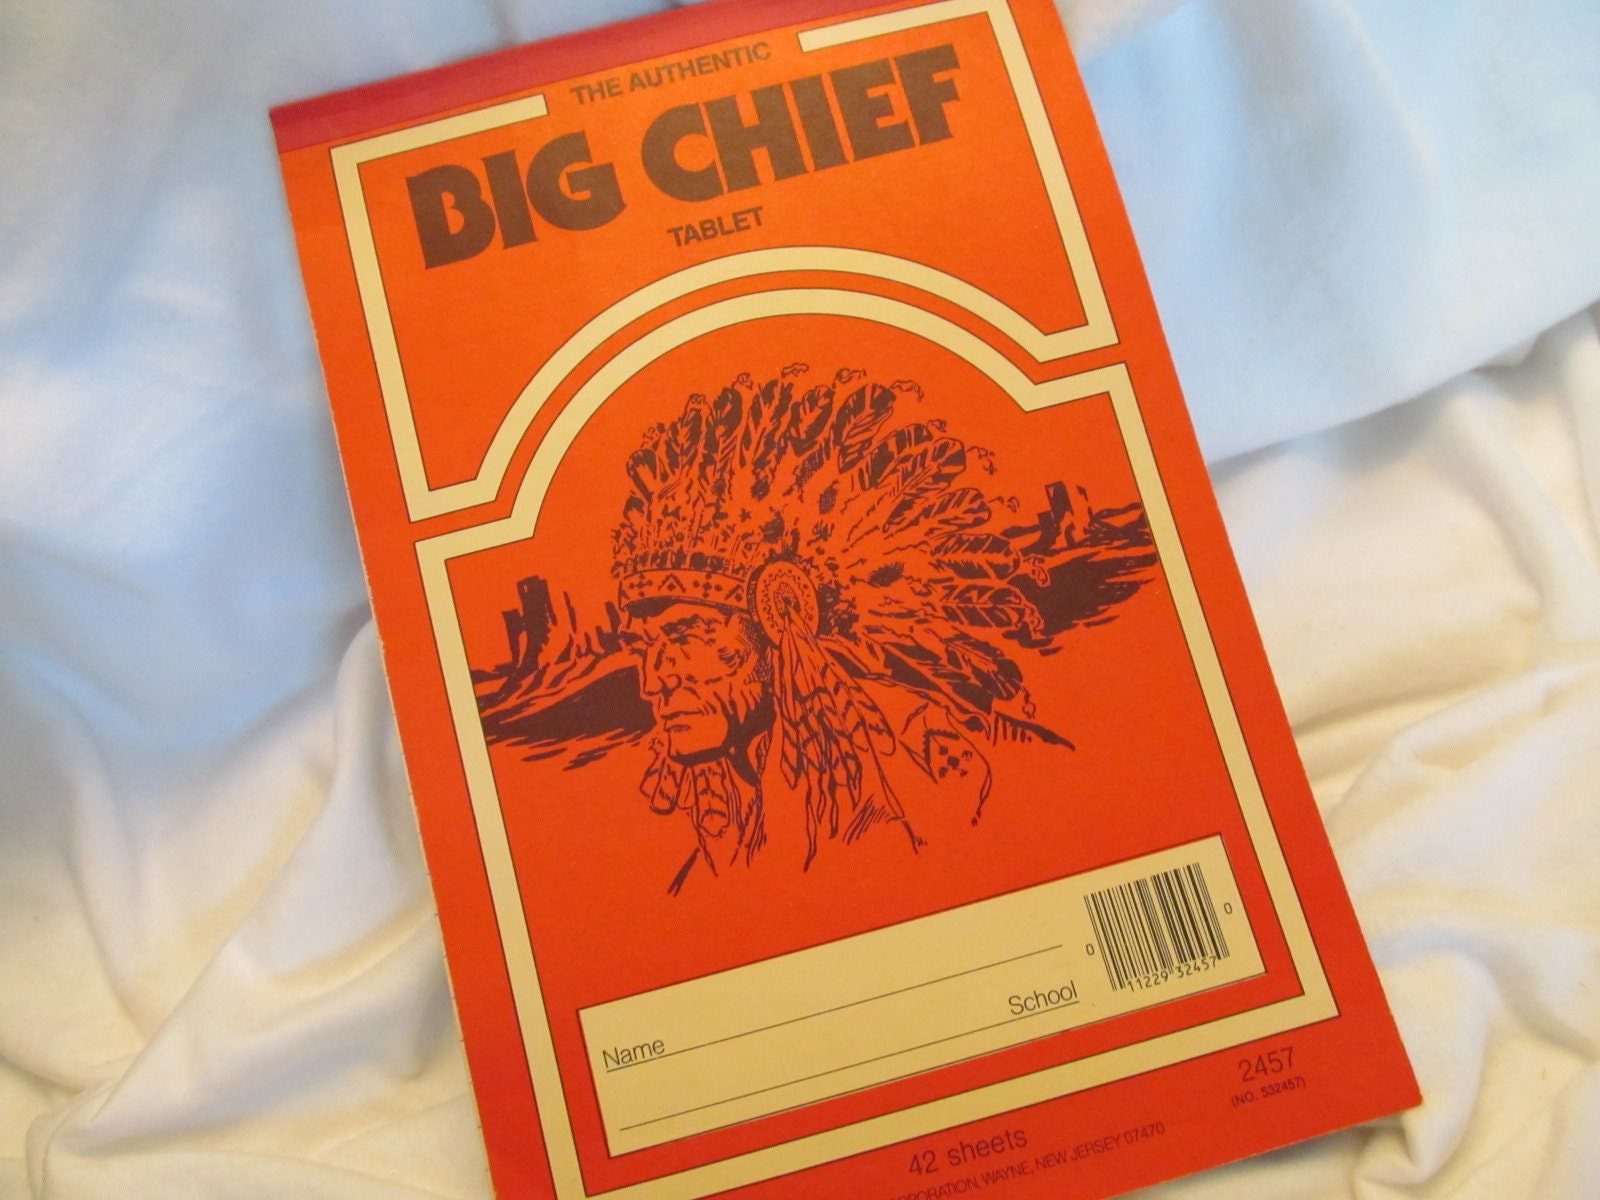 Big Chief Tablet  The Narrative Within